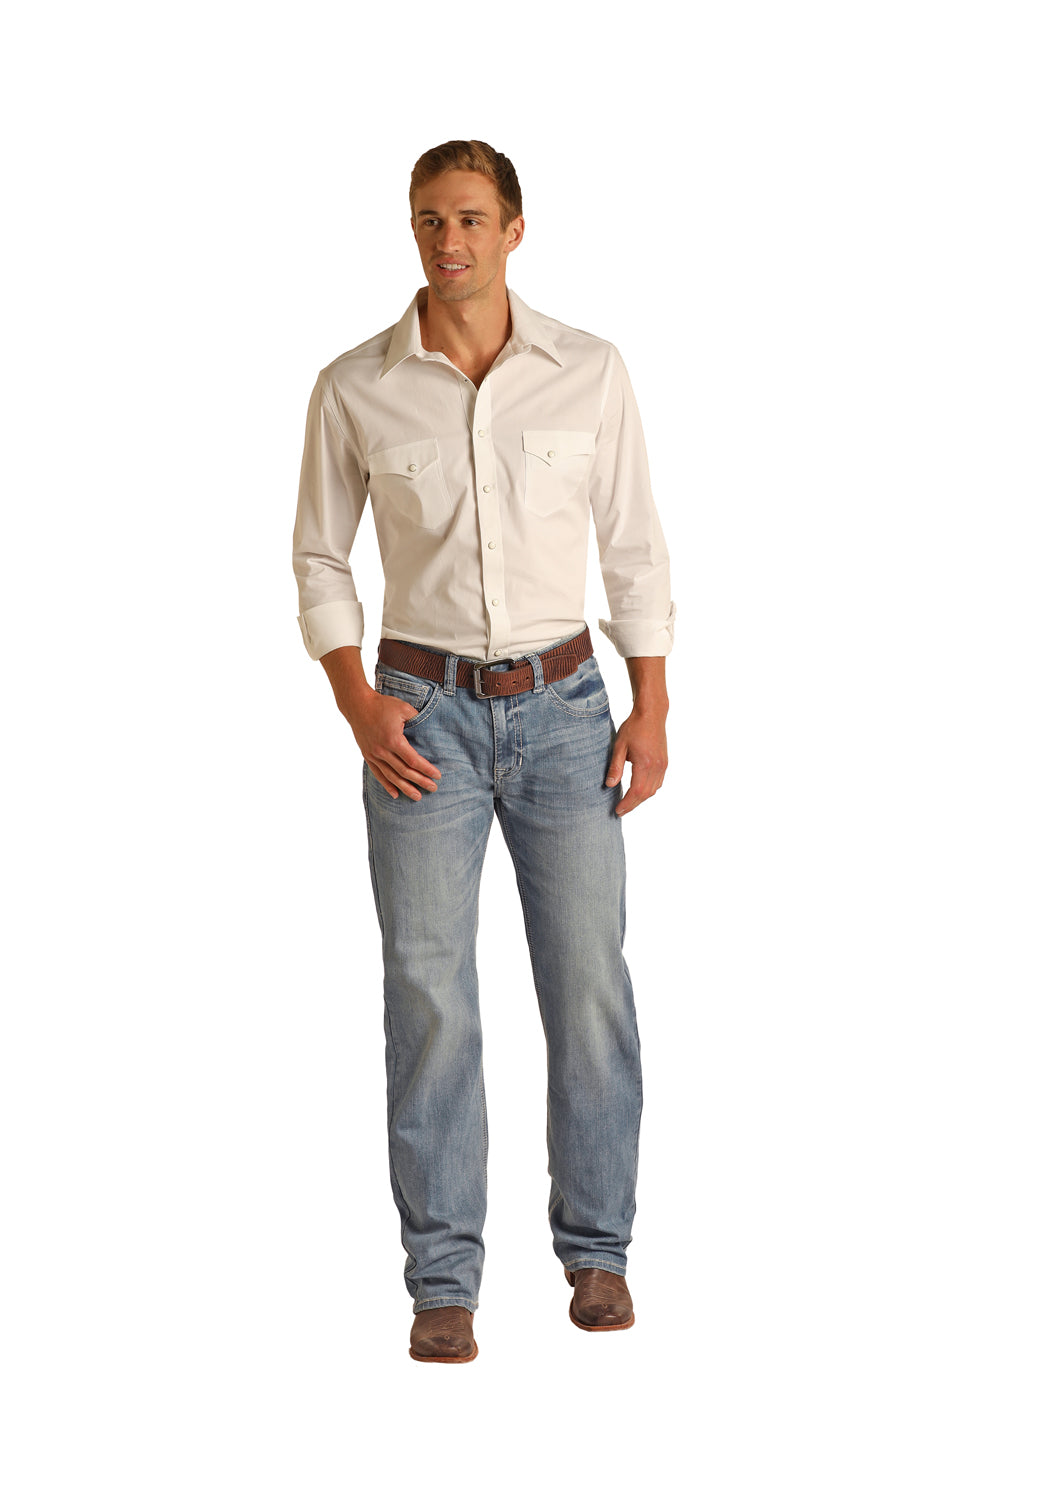 ROCK & ROLL RELAXED FIT TWO TONE LIGHT WASH STRAIGHT BOOTCUT JEANS